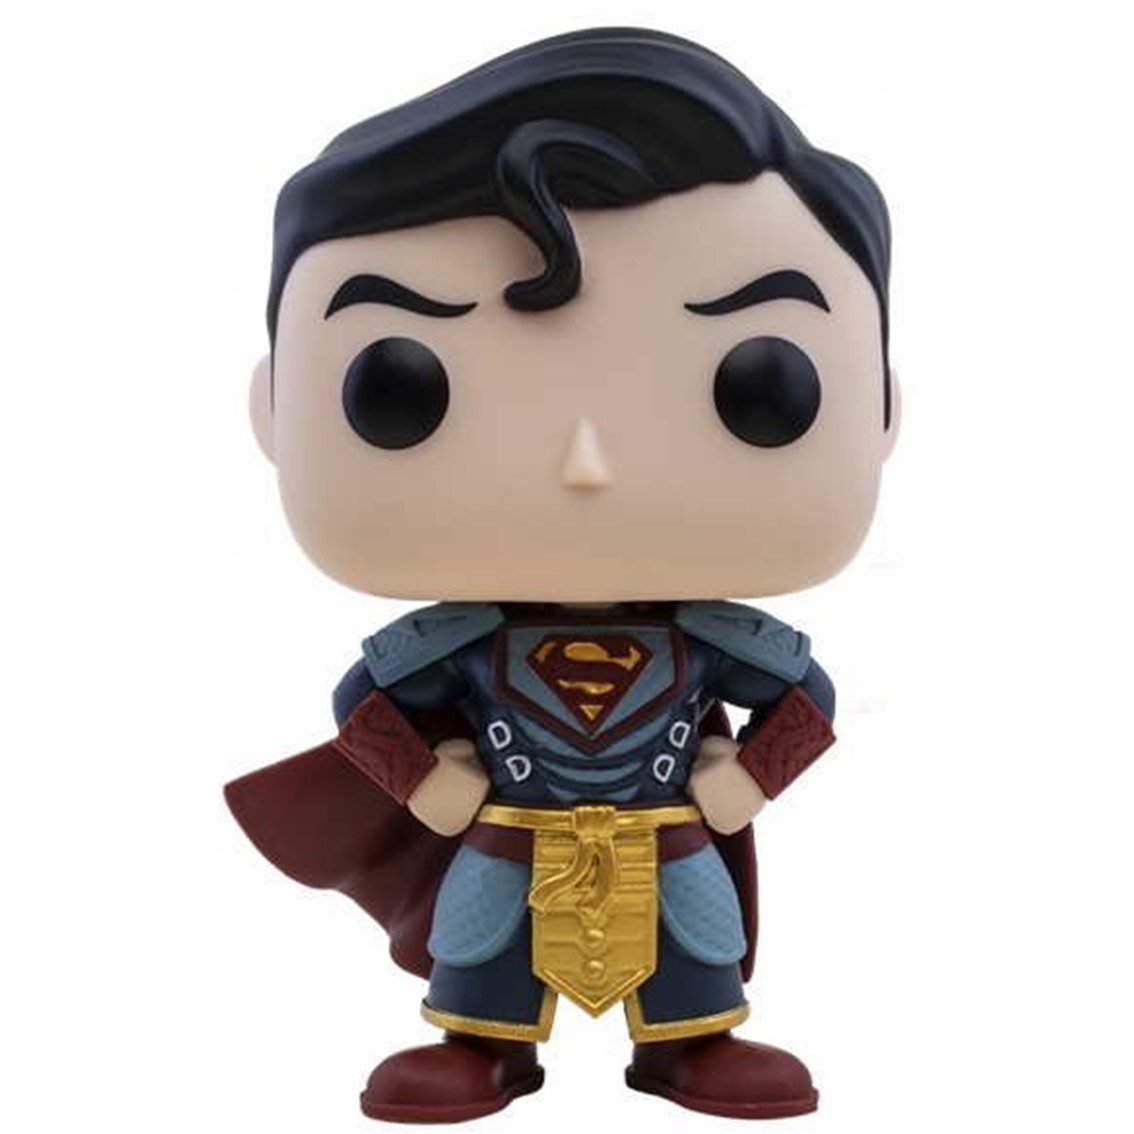 889698524339-PN-52433-Cod.-Articulo-MGS0000005771-Funko-pop-dc-imperial-palace-superman-52433-1